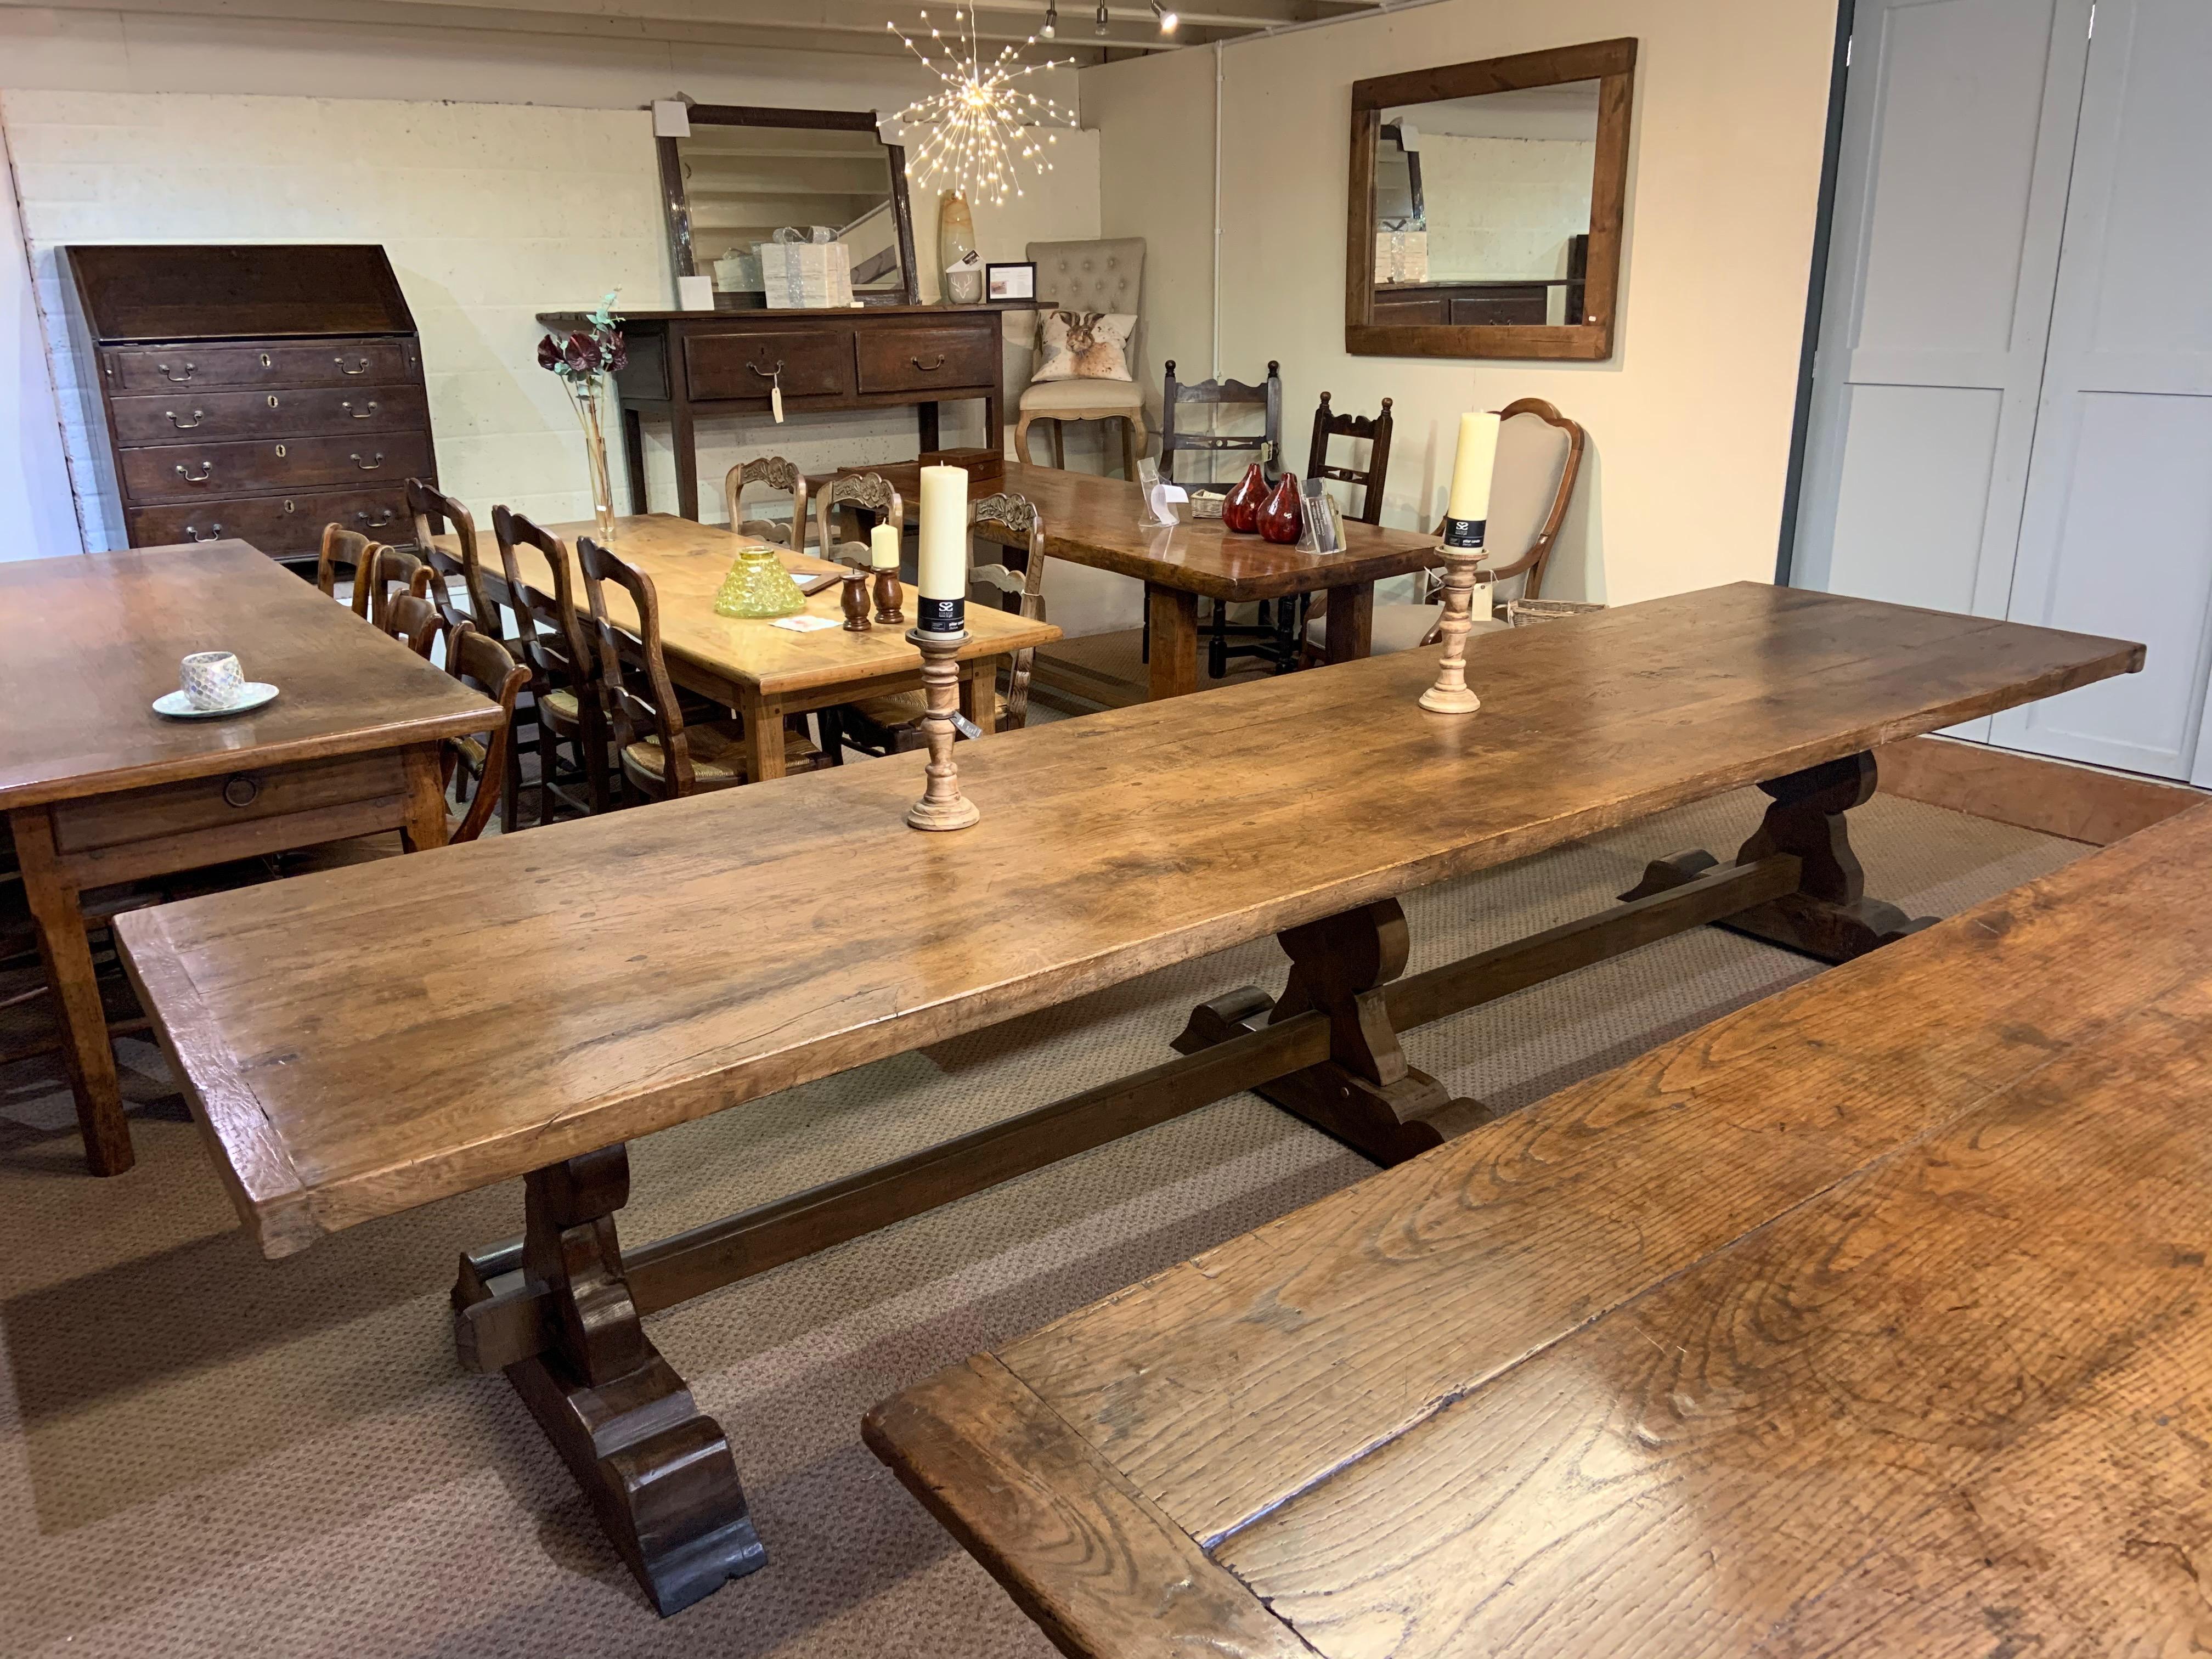 17th century style large trestle farmhouse table with two wide trestle benches and fantastic proportions.